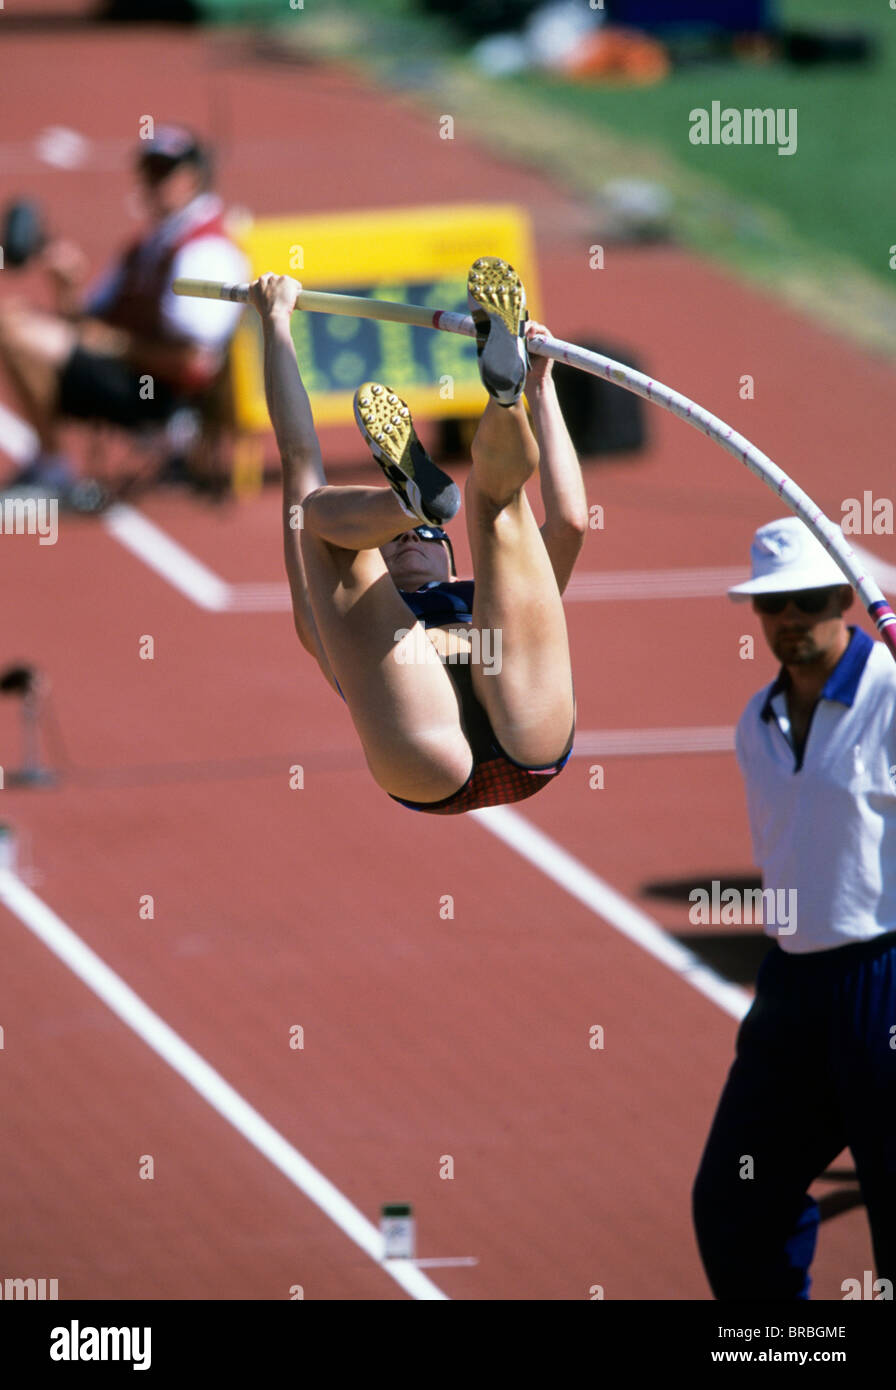 Female pole vaulter bends bar as she attempts a clearance watched closely by judge at track ...